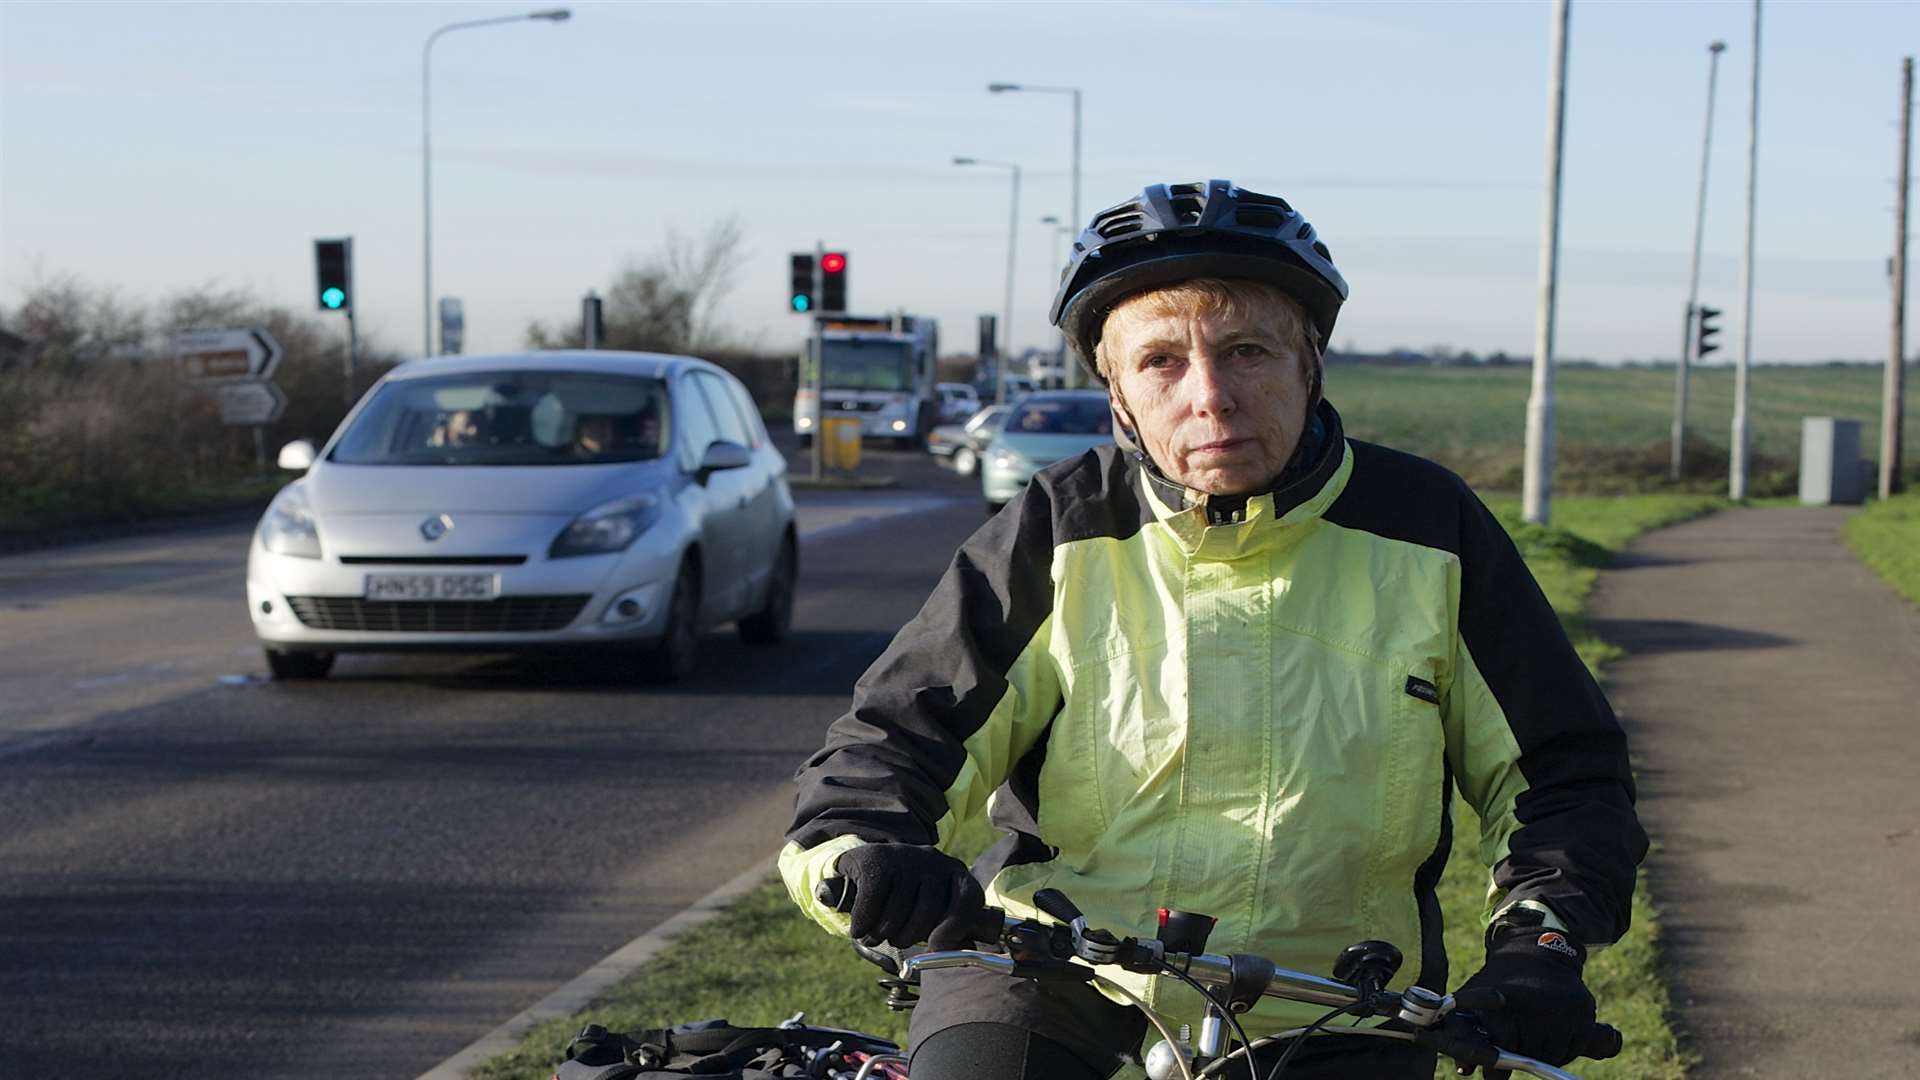 Helen Knell is campaigning for better cycling provision on Lower Road.